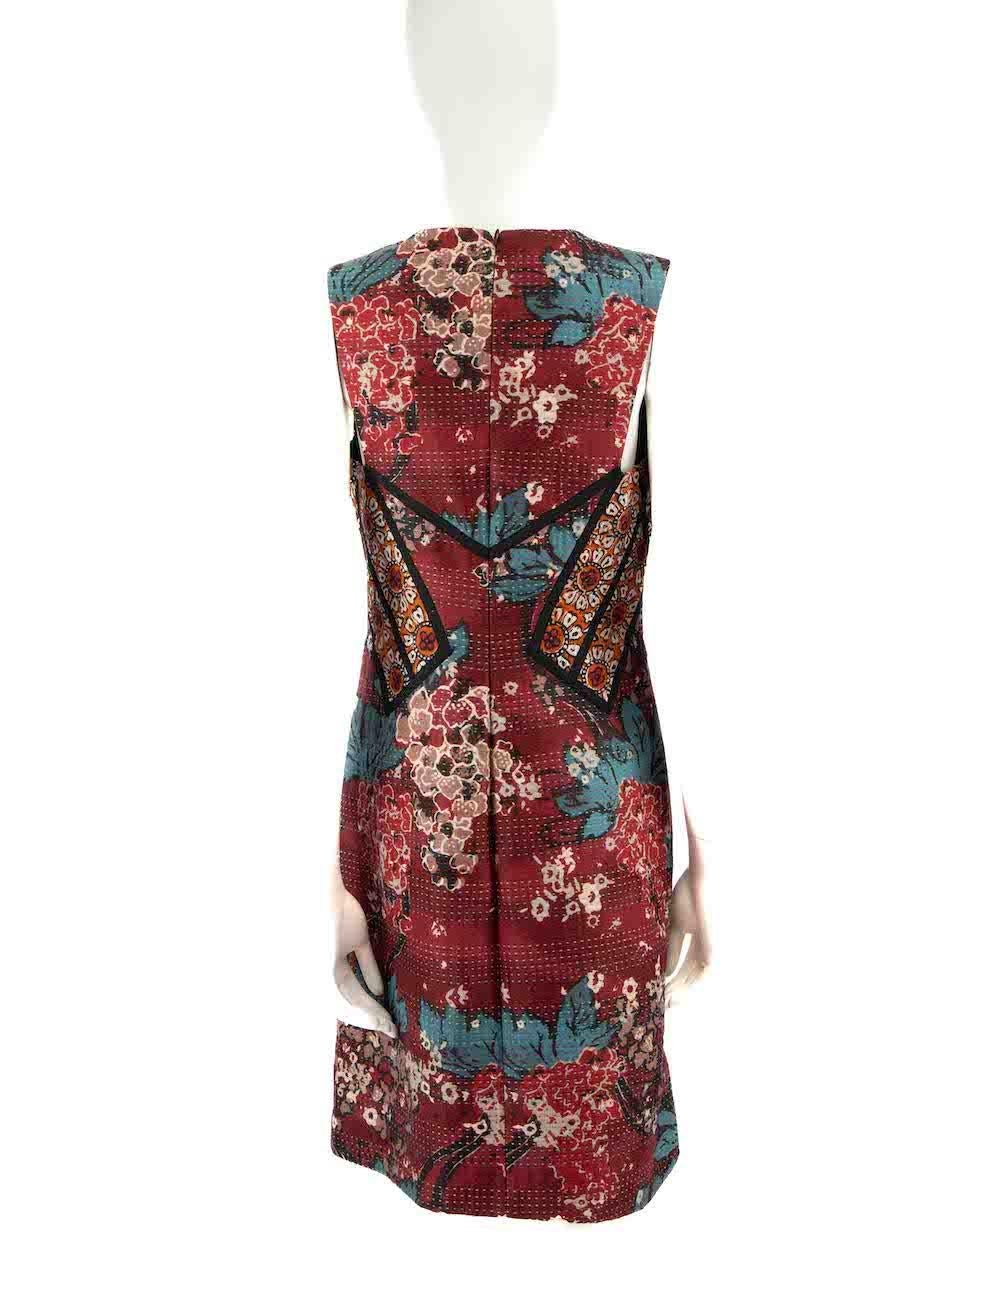 Burberry Burberry Prorsum Burgundy Floral Embroidered Dress Size M In Excellent Condition For Sale In London, GB